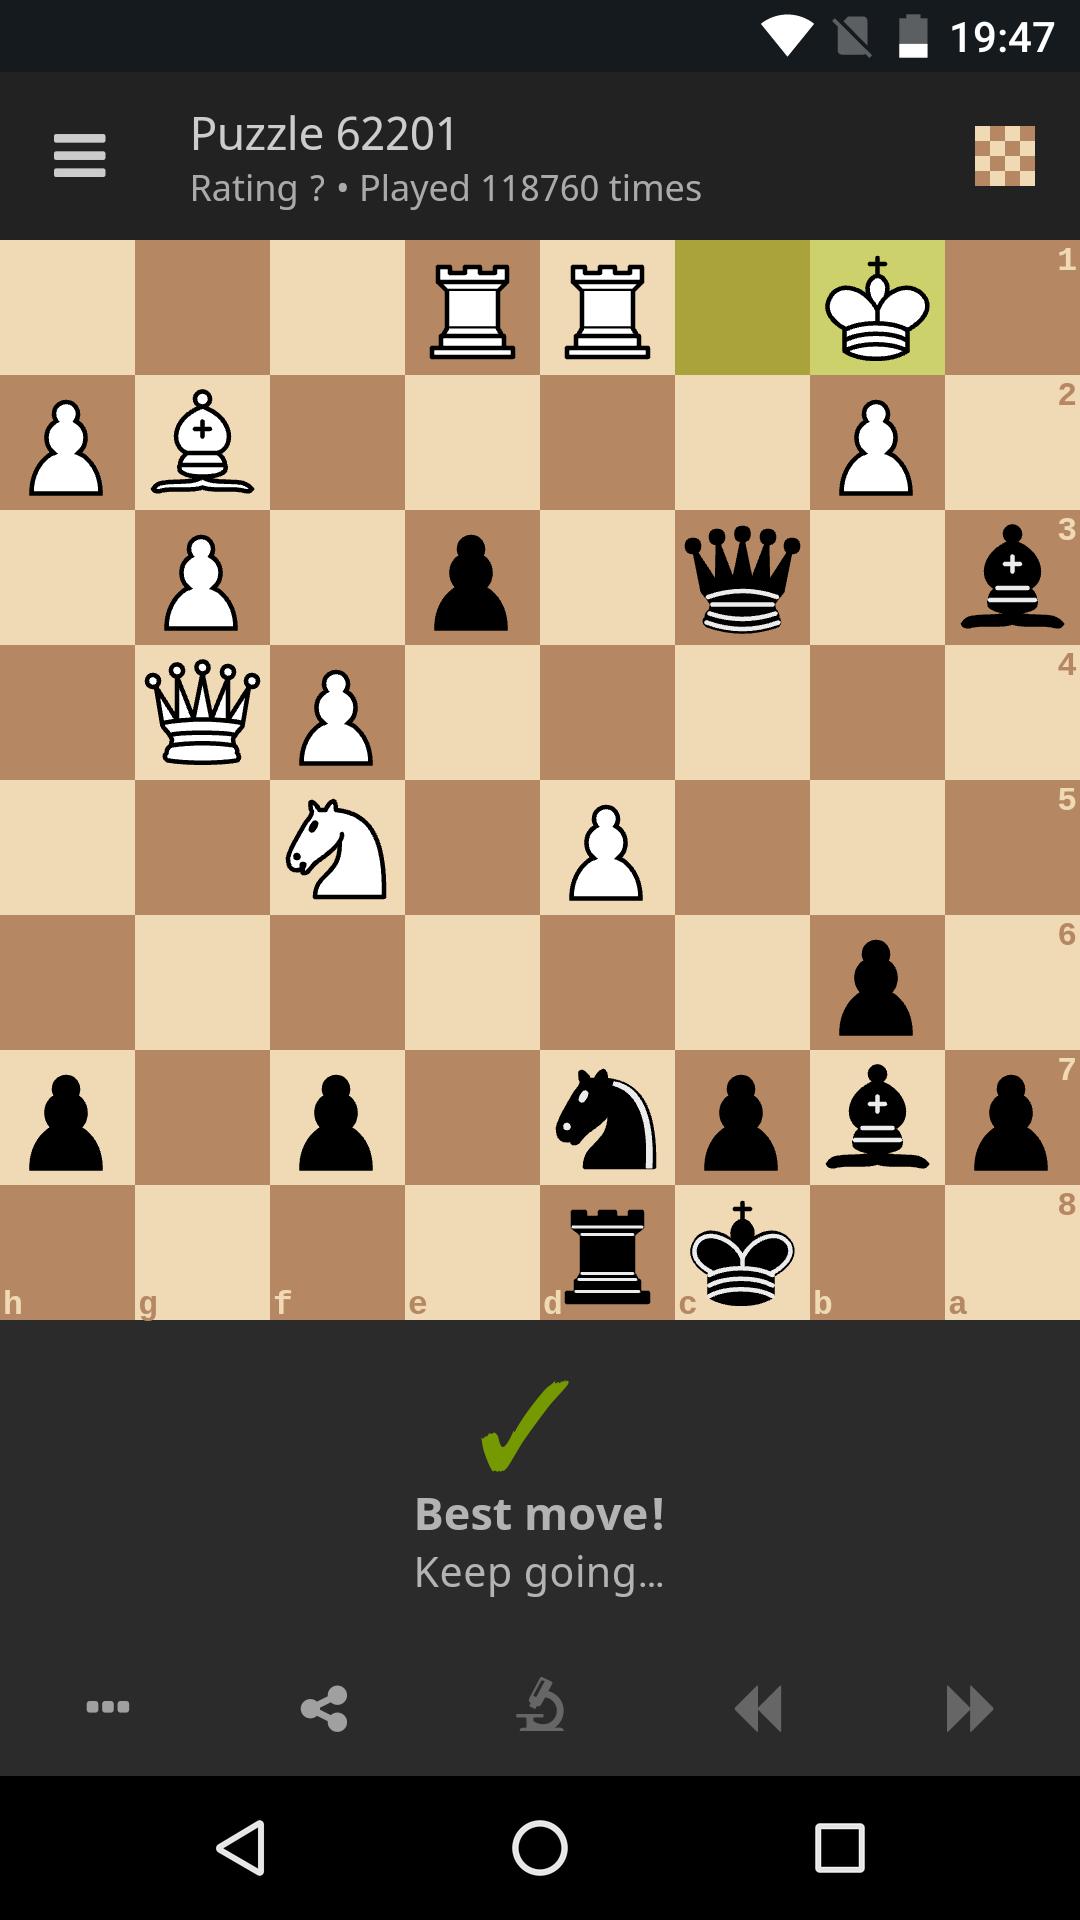 lichess for Android - APK Download